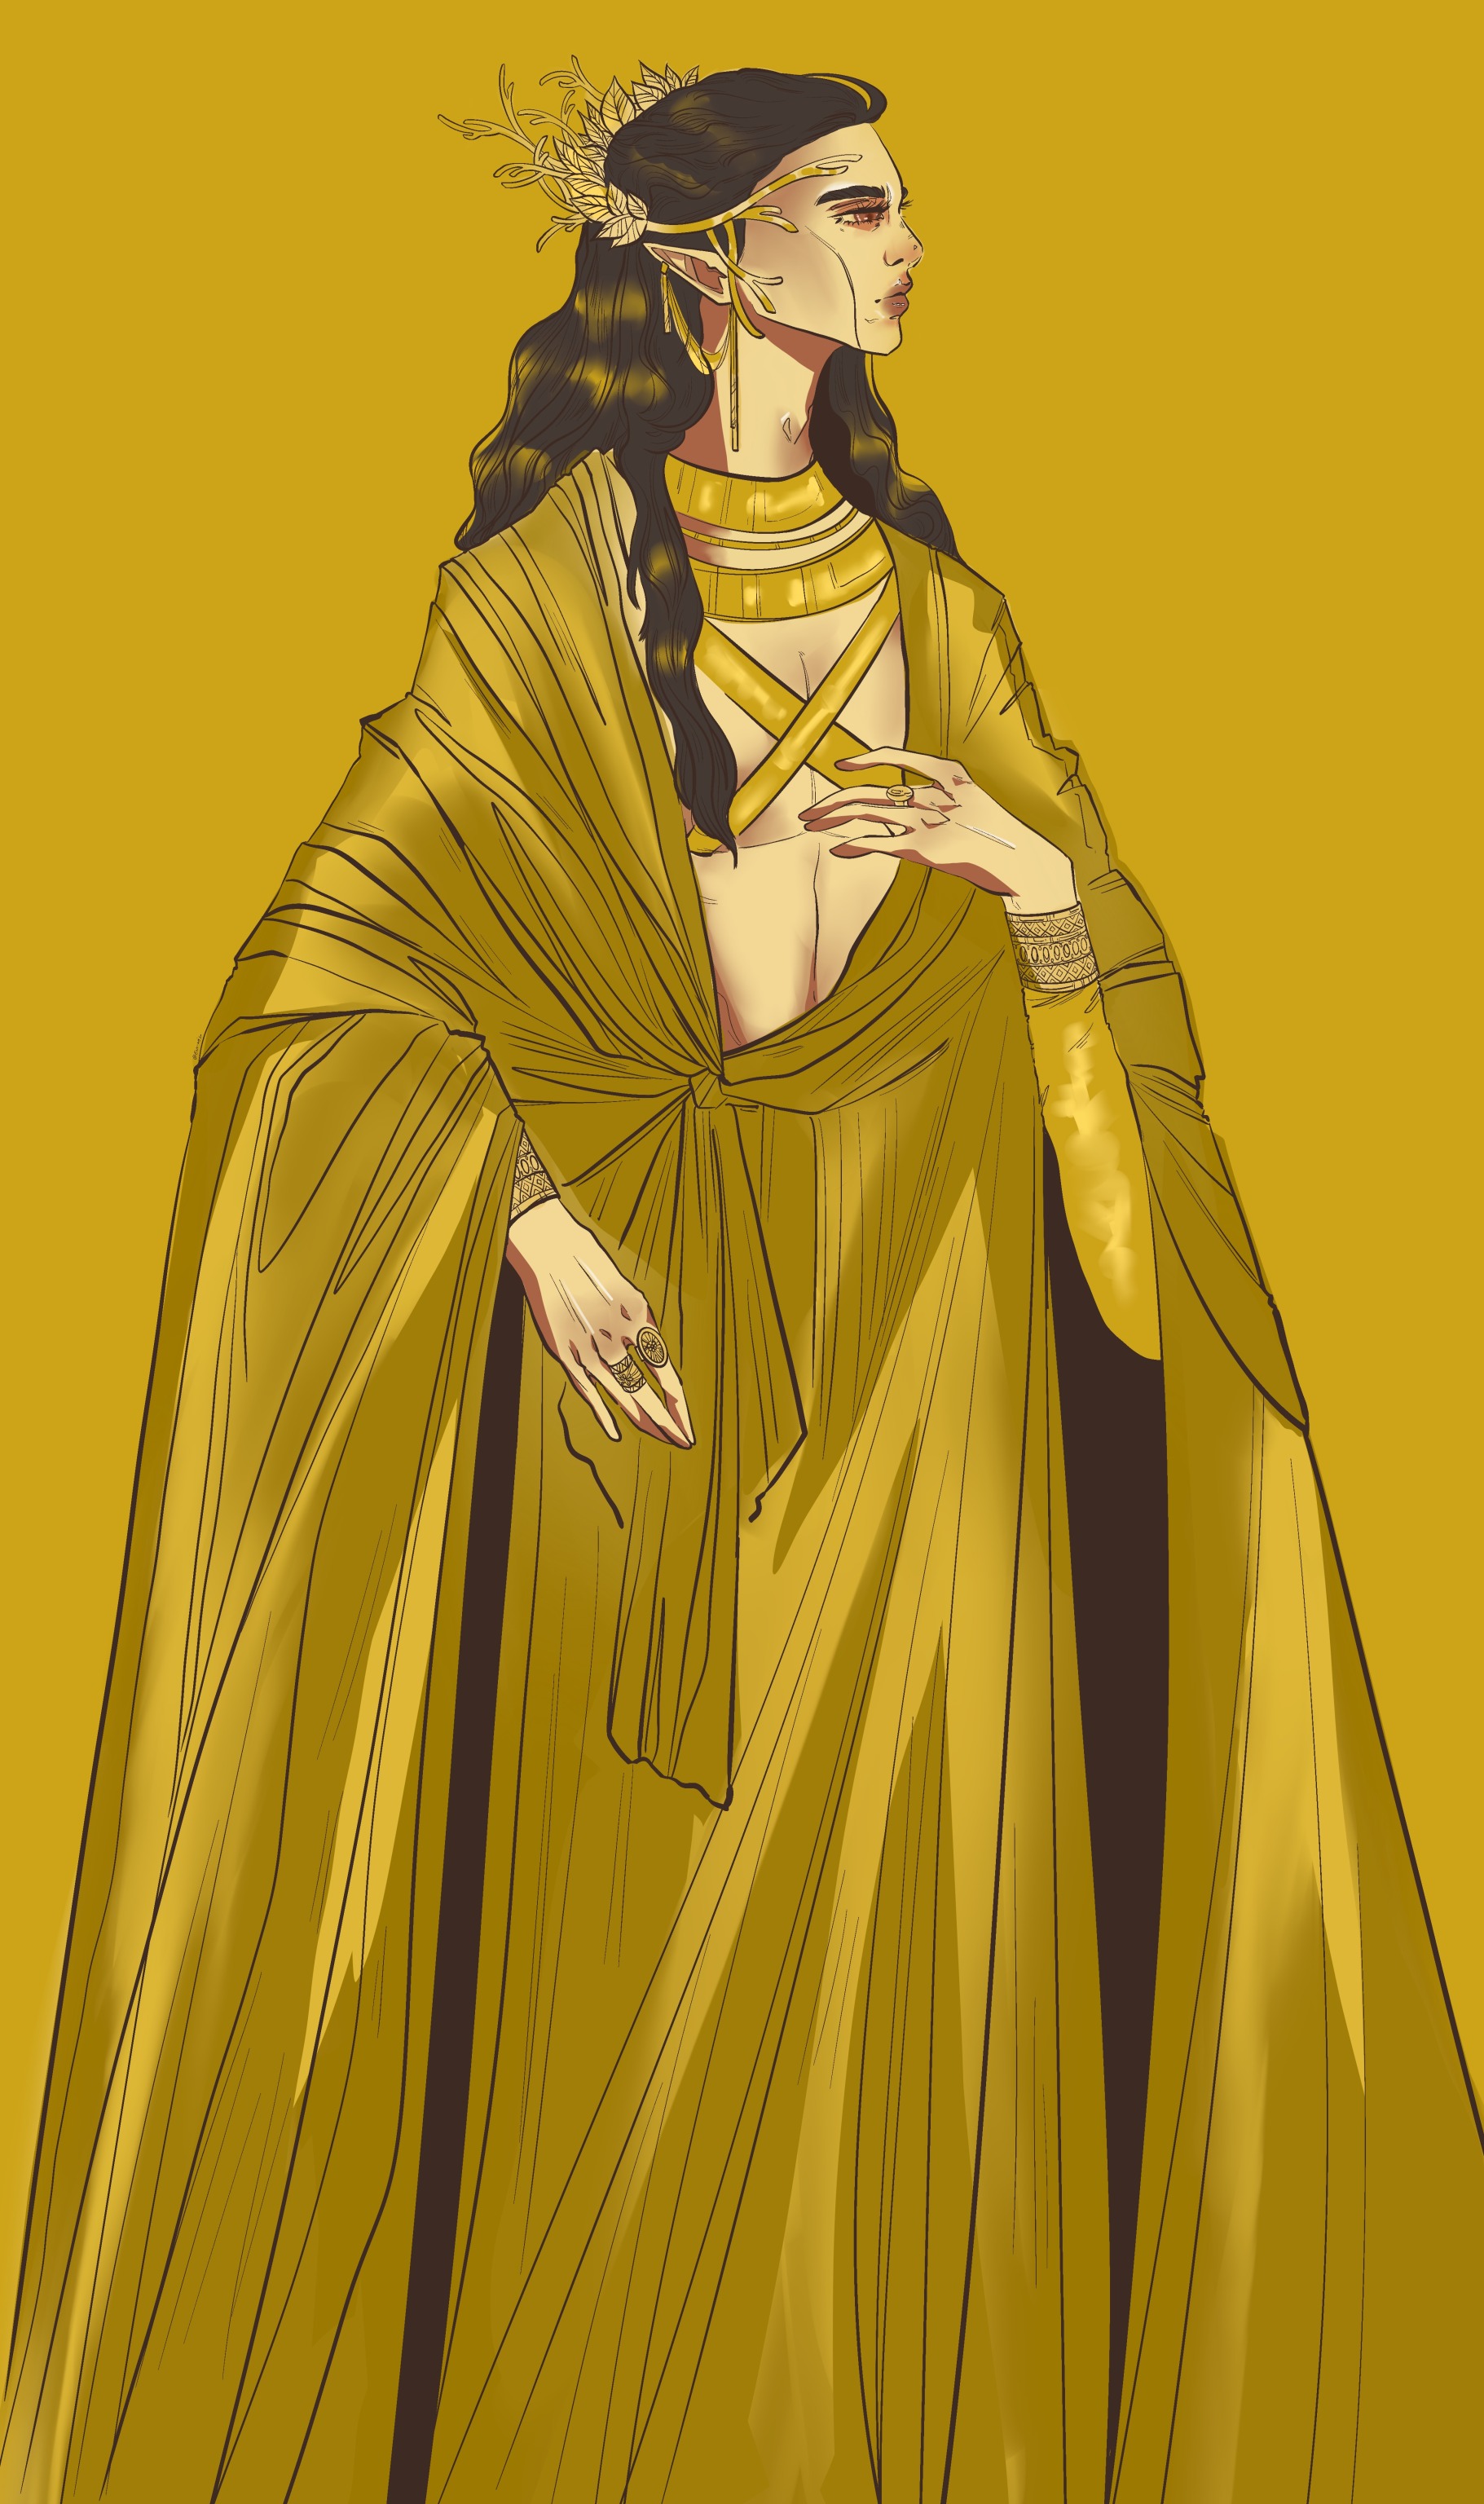 Gold boy (Gil-galad) by choe-eon, Gil-galad standing in profile, wearing golden robes